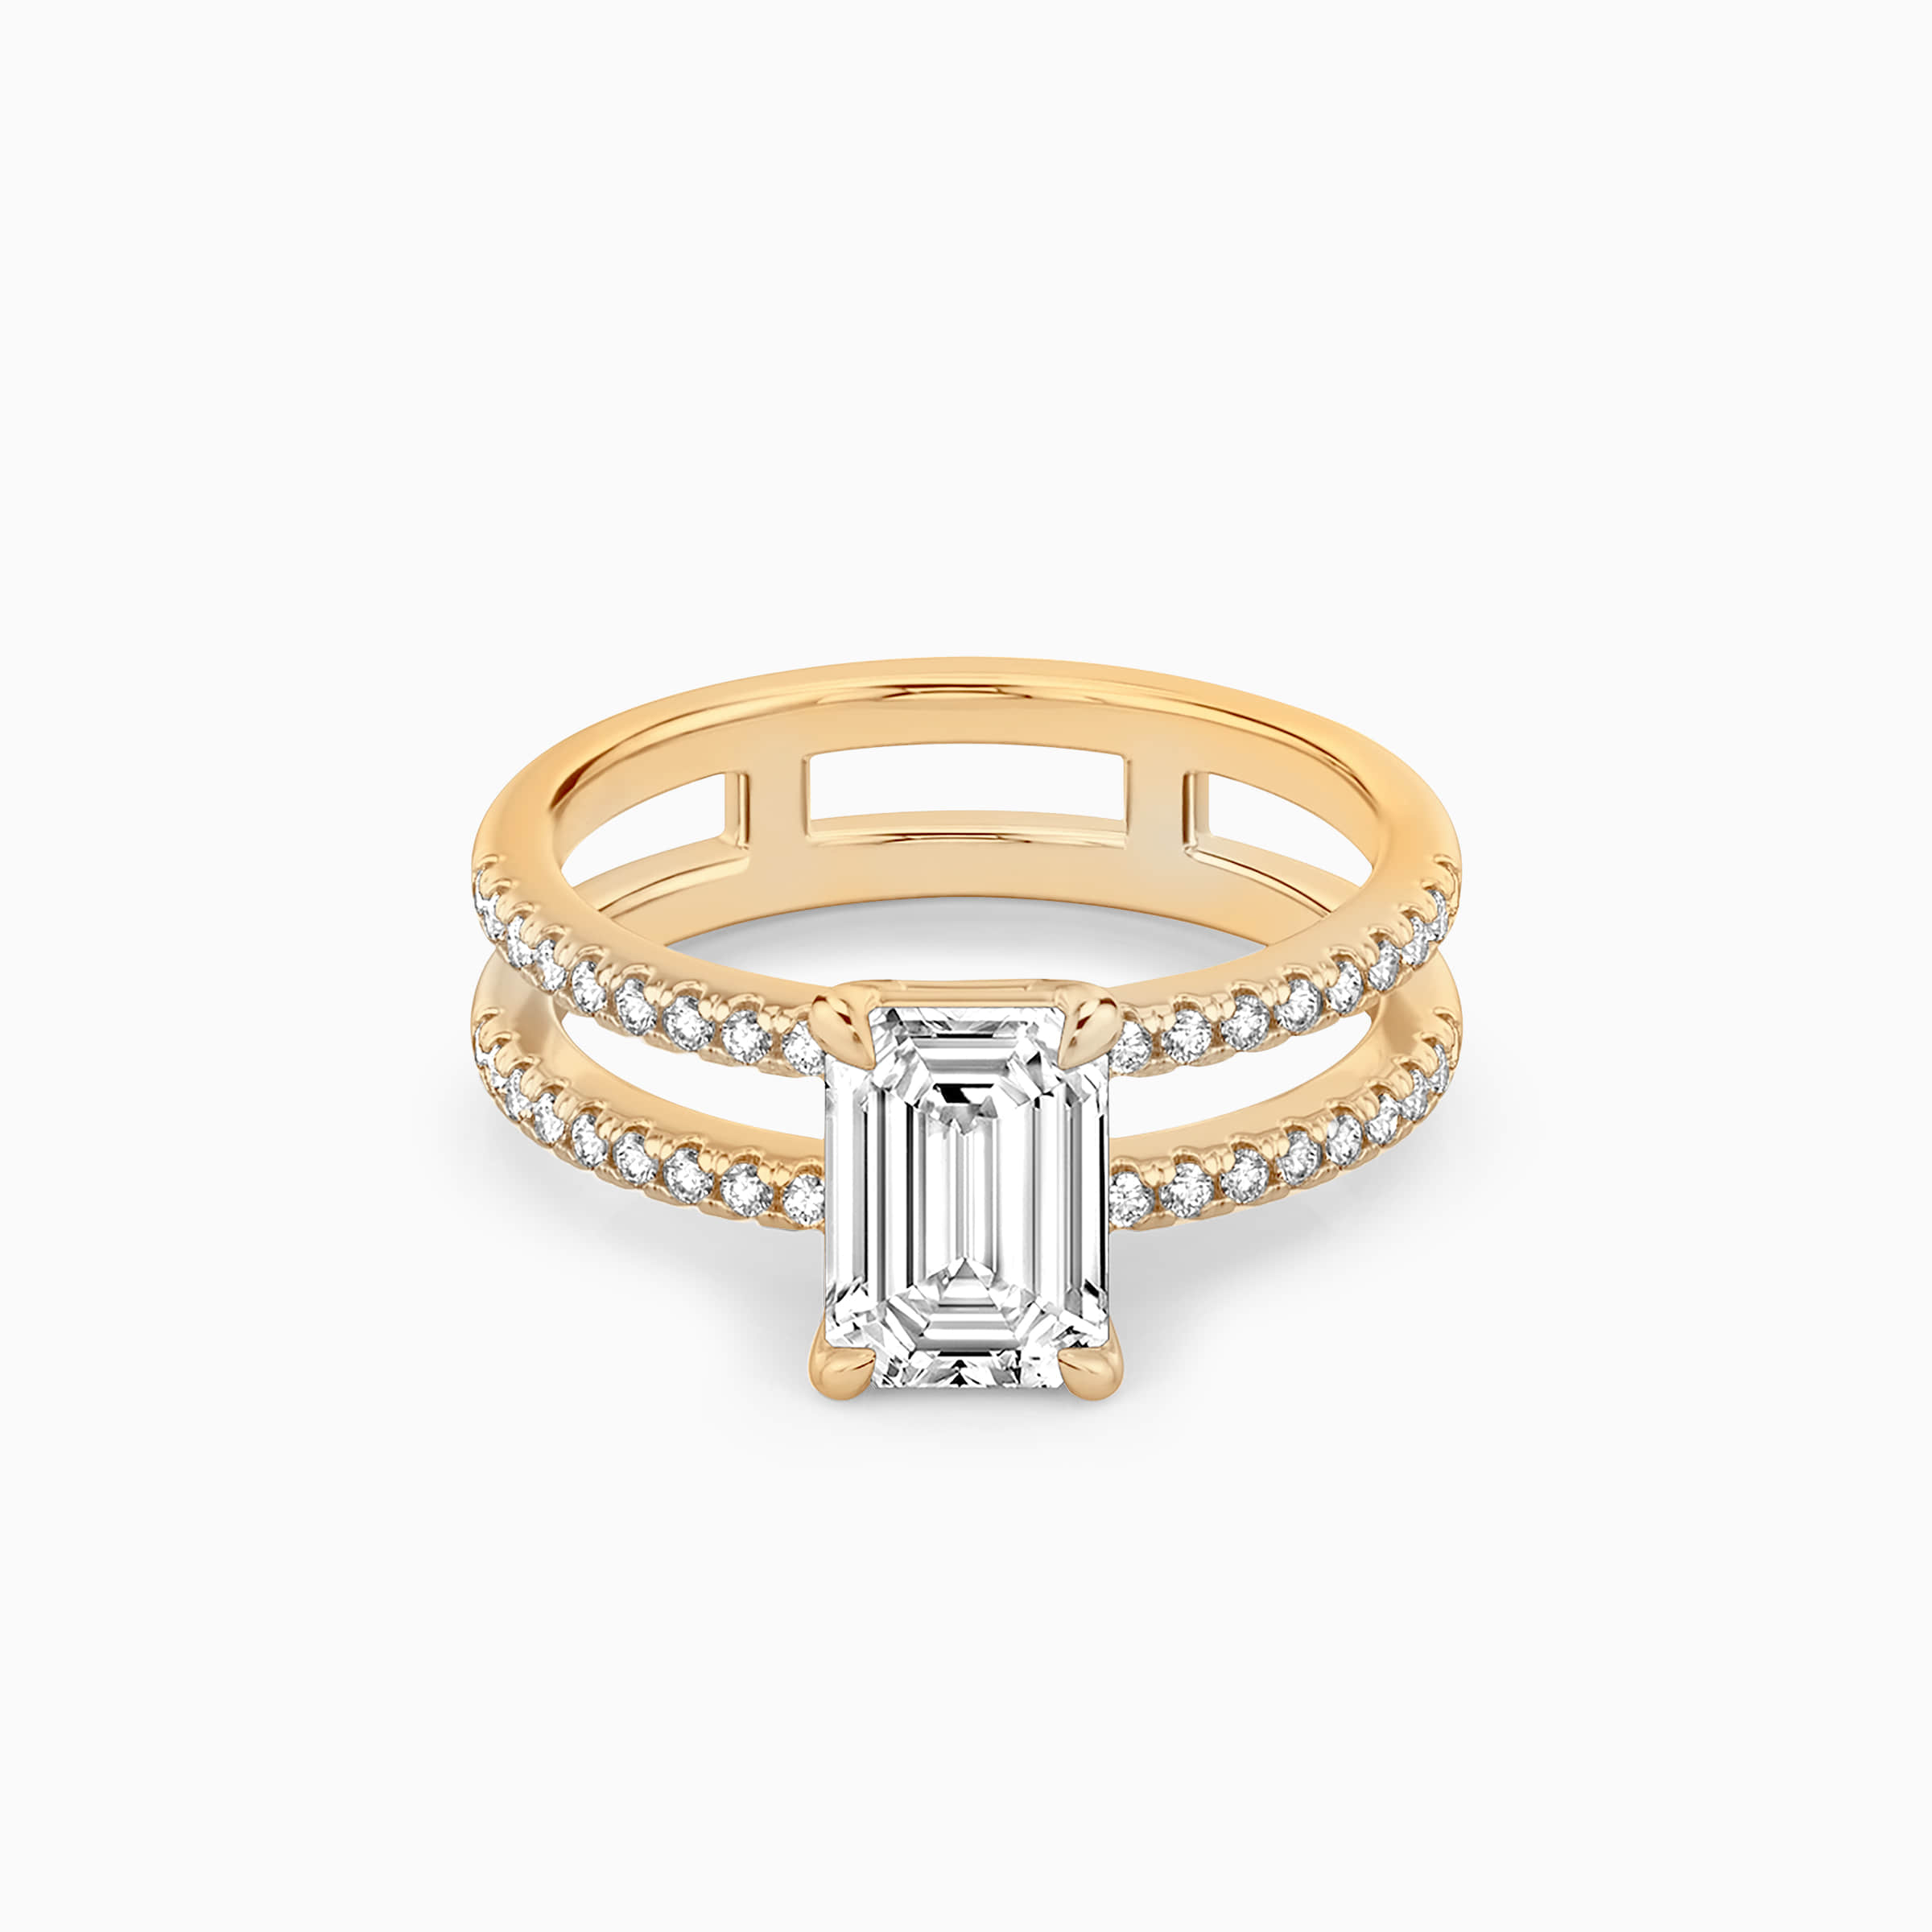 White Gold or Yellow Gold: Which One Should You Purchase?